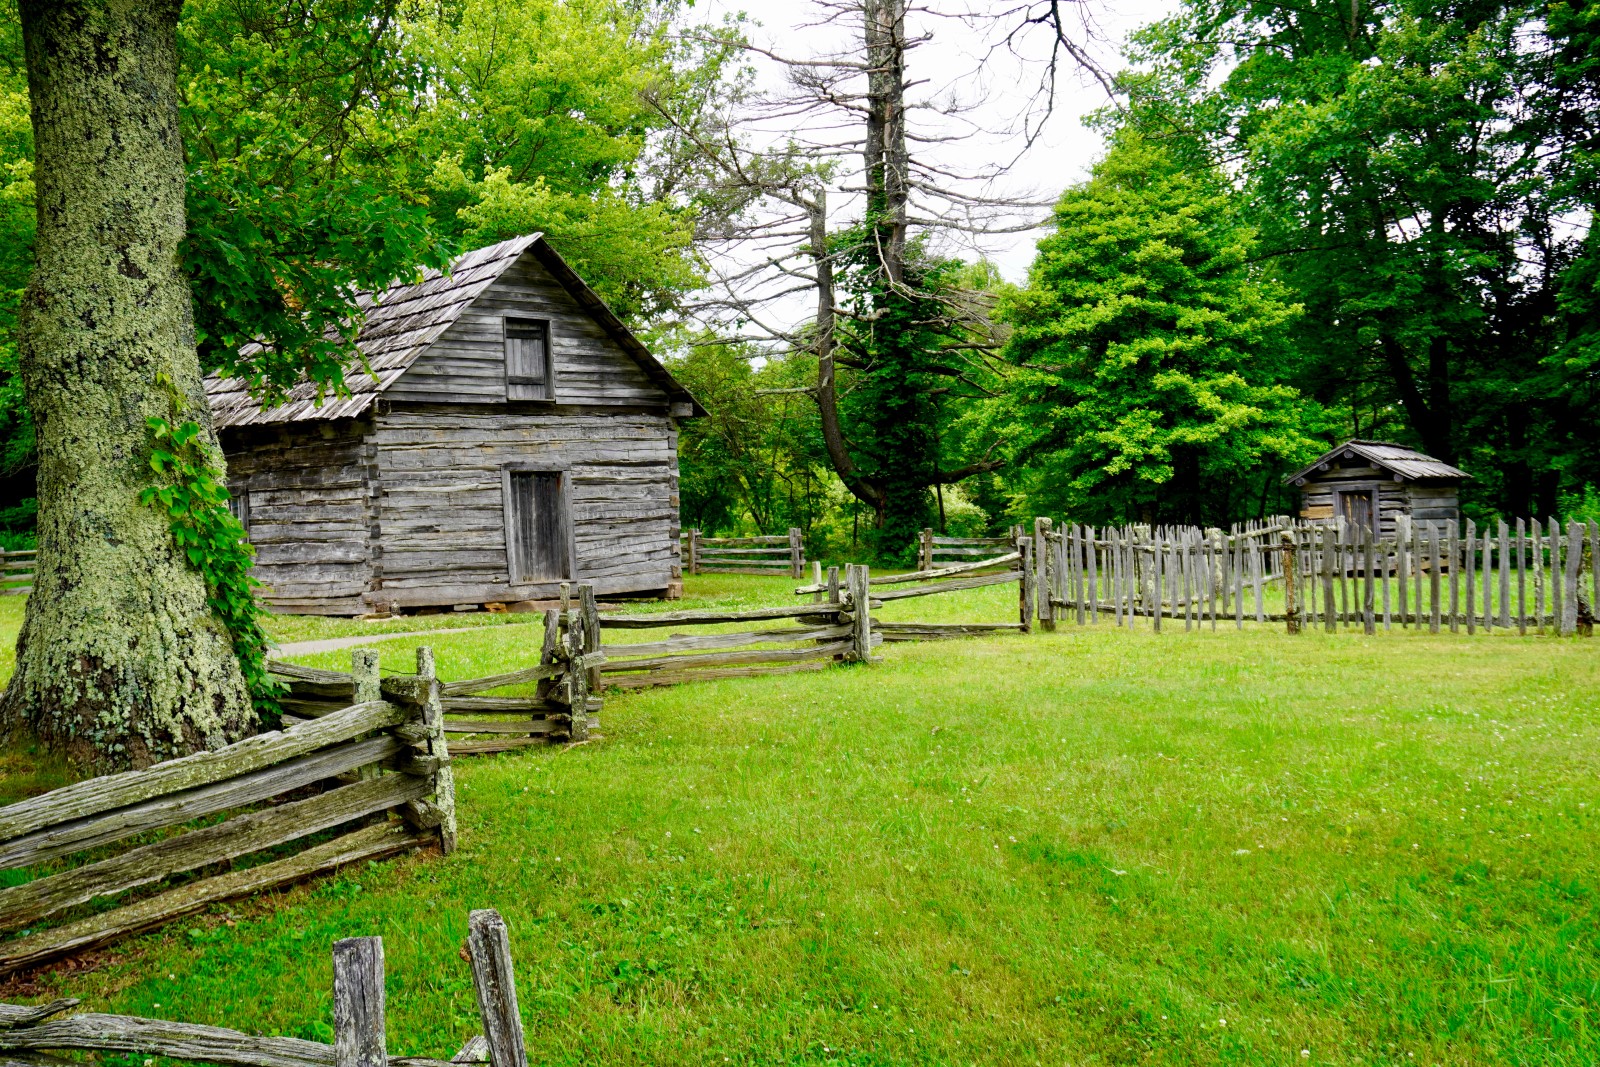 the grounds of the Meadow Farm Museum at Crump Park in Glenn Allen, VA